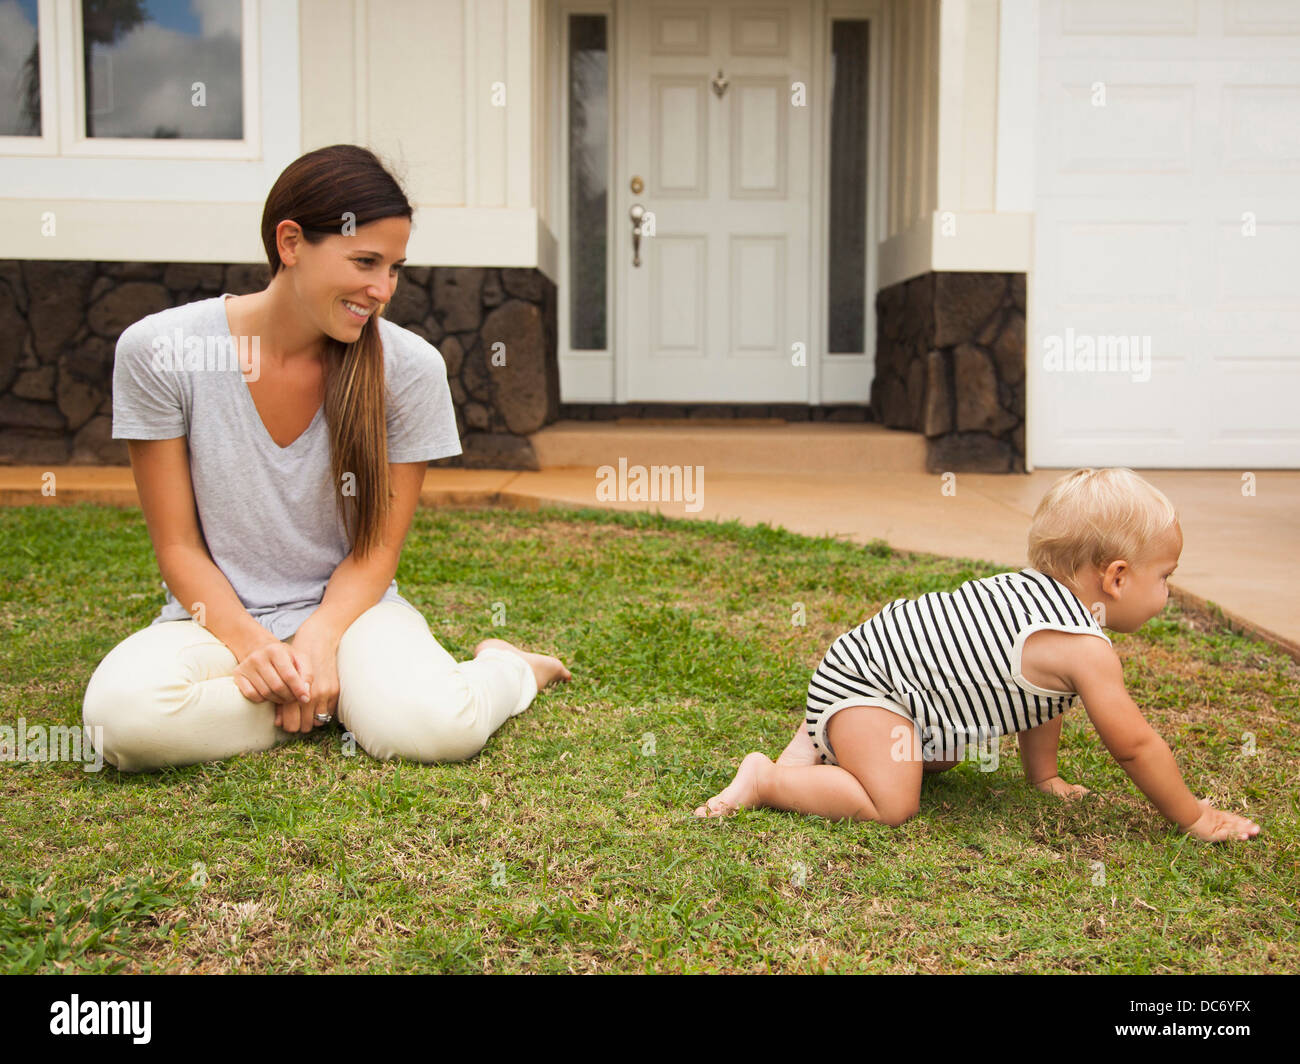 USA, Hawaii, Kauai, Mother with baby boy (6-11 months) in front of house Stock Photo